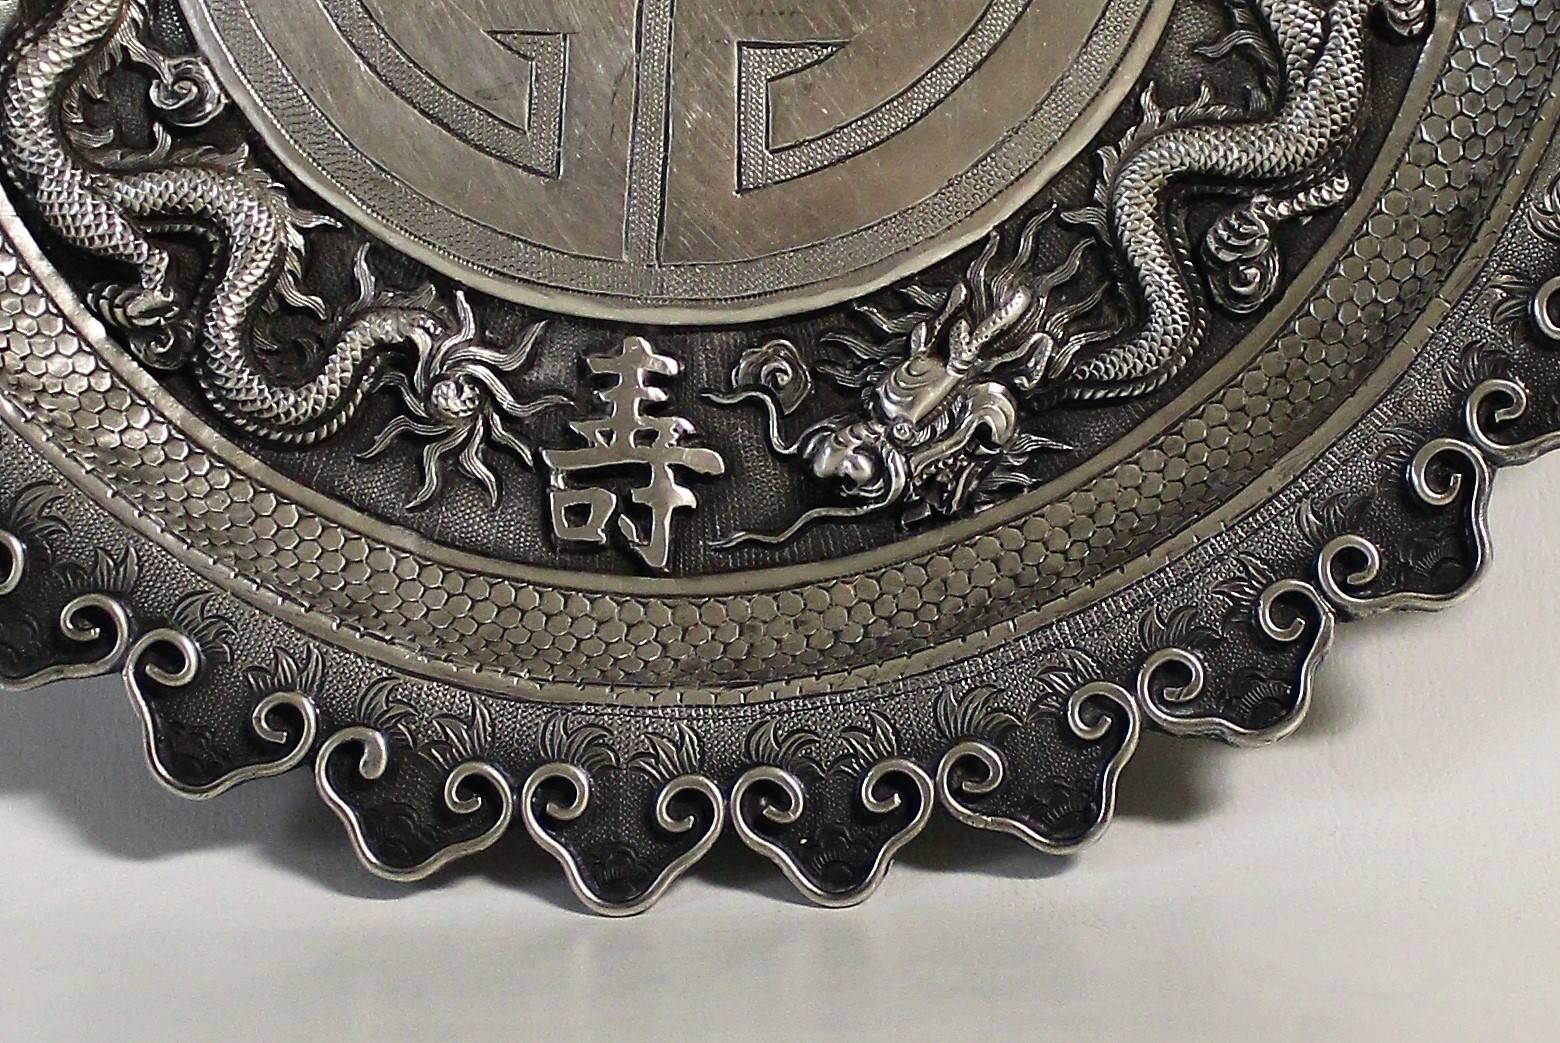 19th Century Chinese Export Silver Bowl, Plate & Seal Attributed to Tu Mao Xing 2